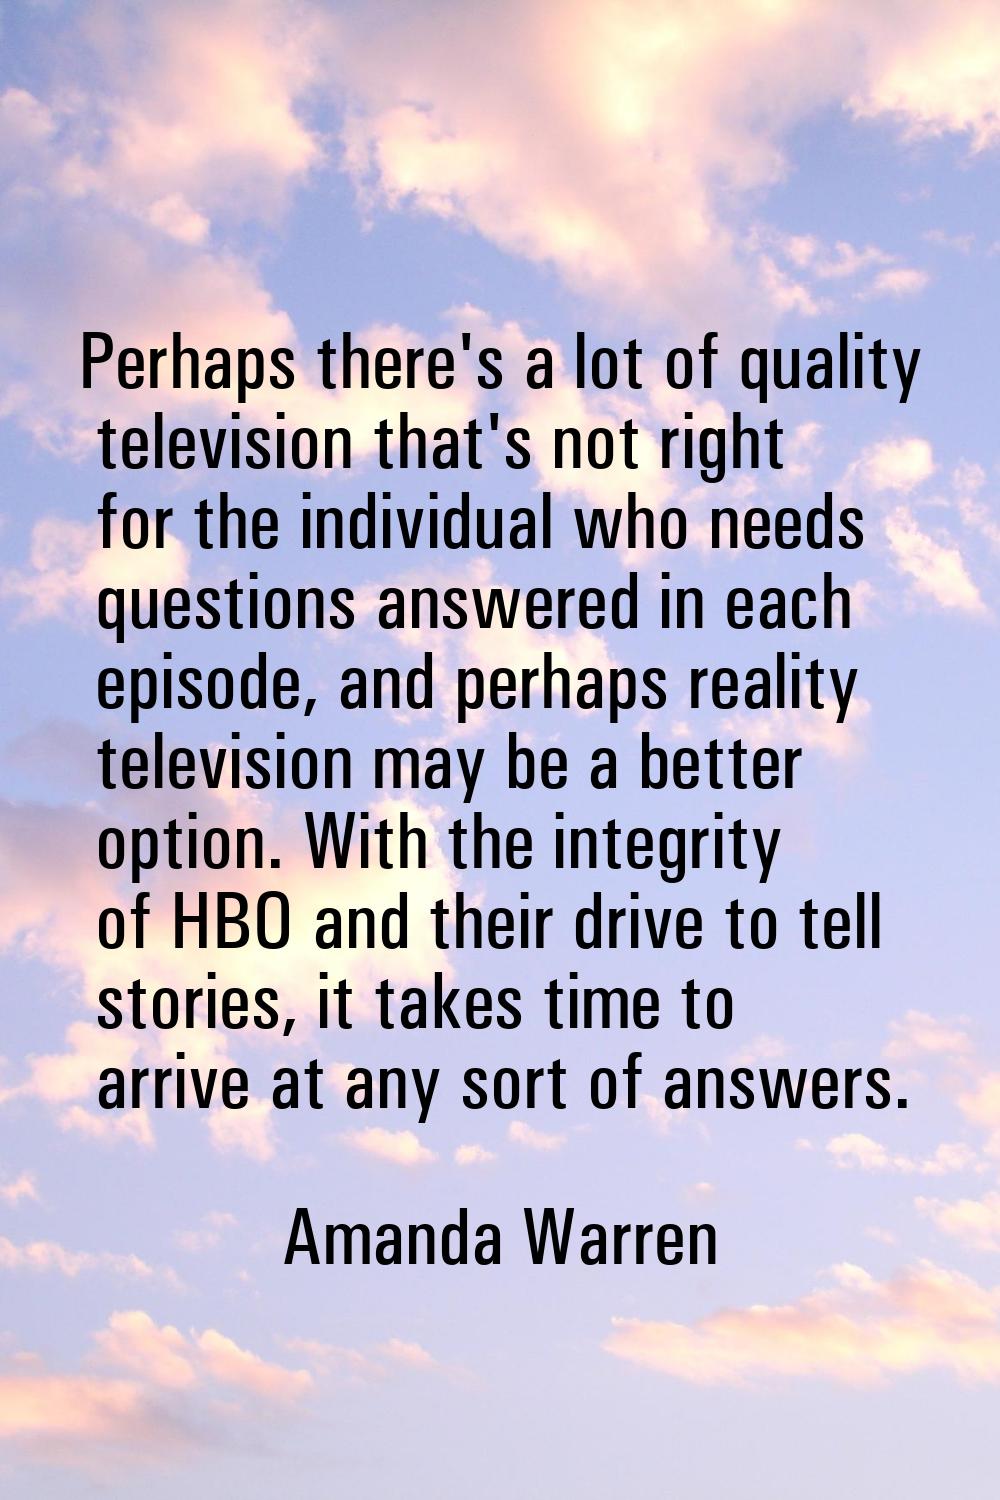 Perhaps there's a lot of quality television that's not right for the individual who needs questions